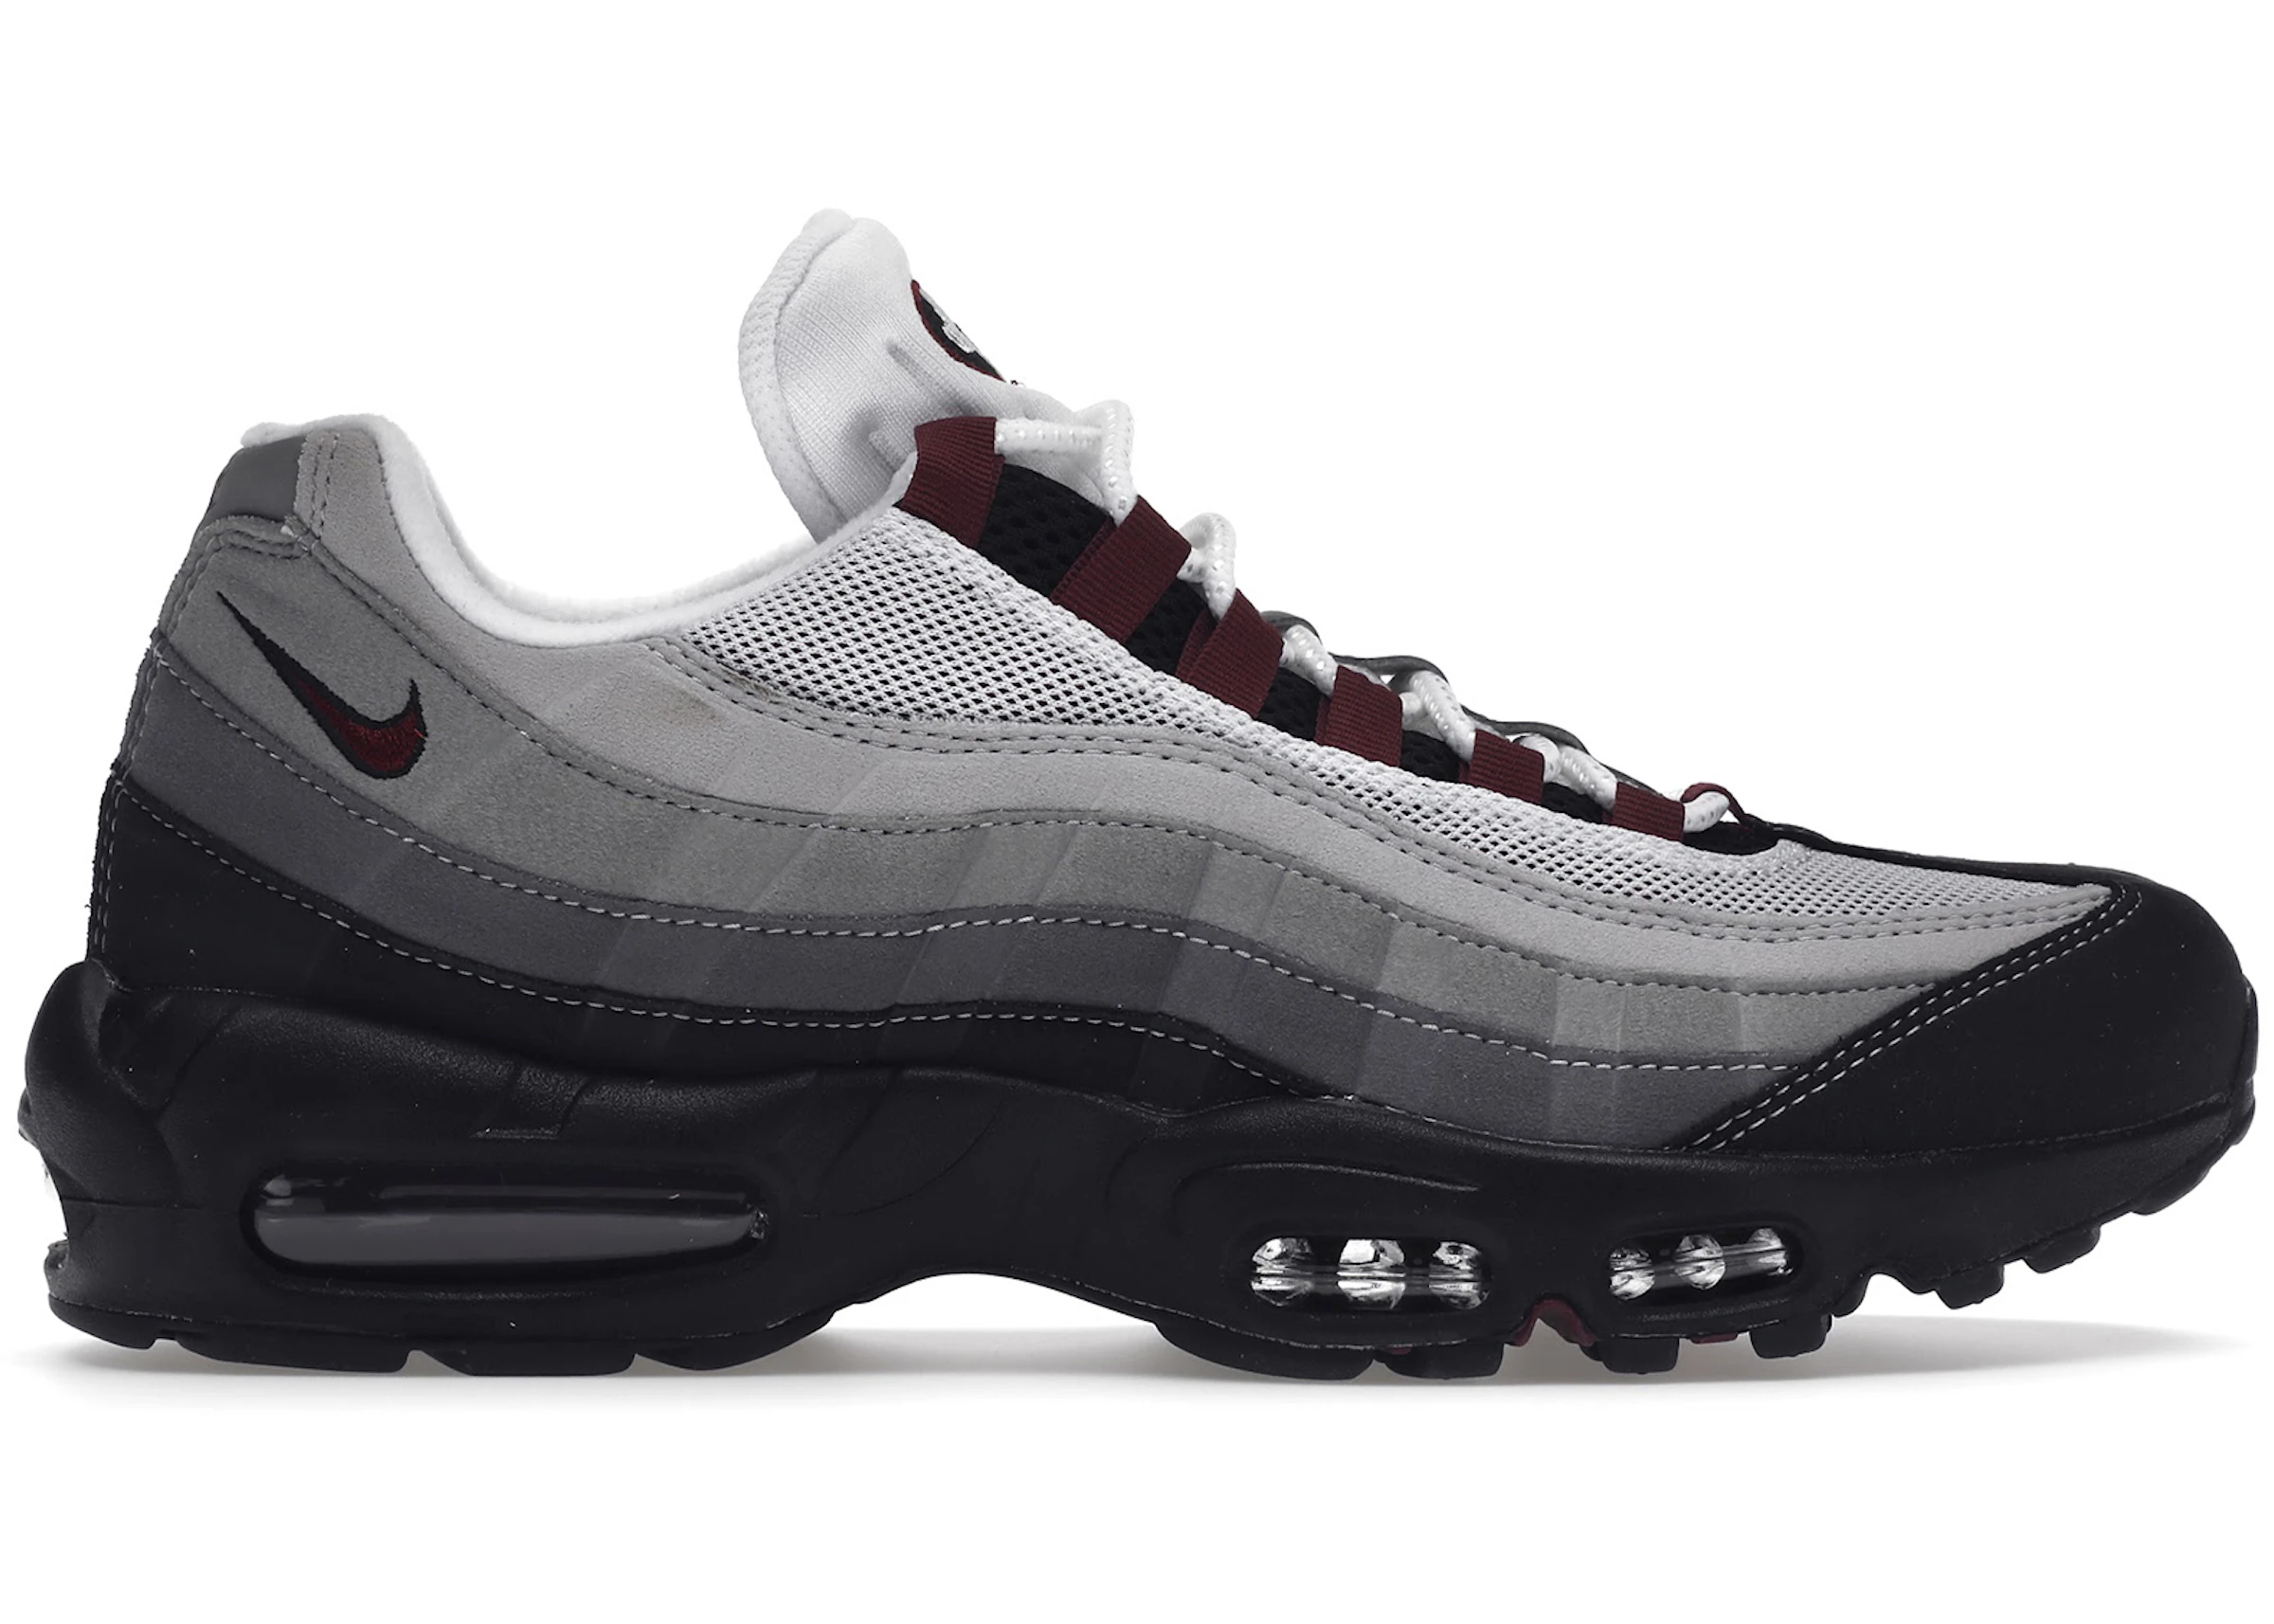 Buy Nike mens shox shoes Air Max Shoes & New Sneakers - StockX